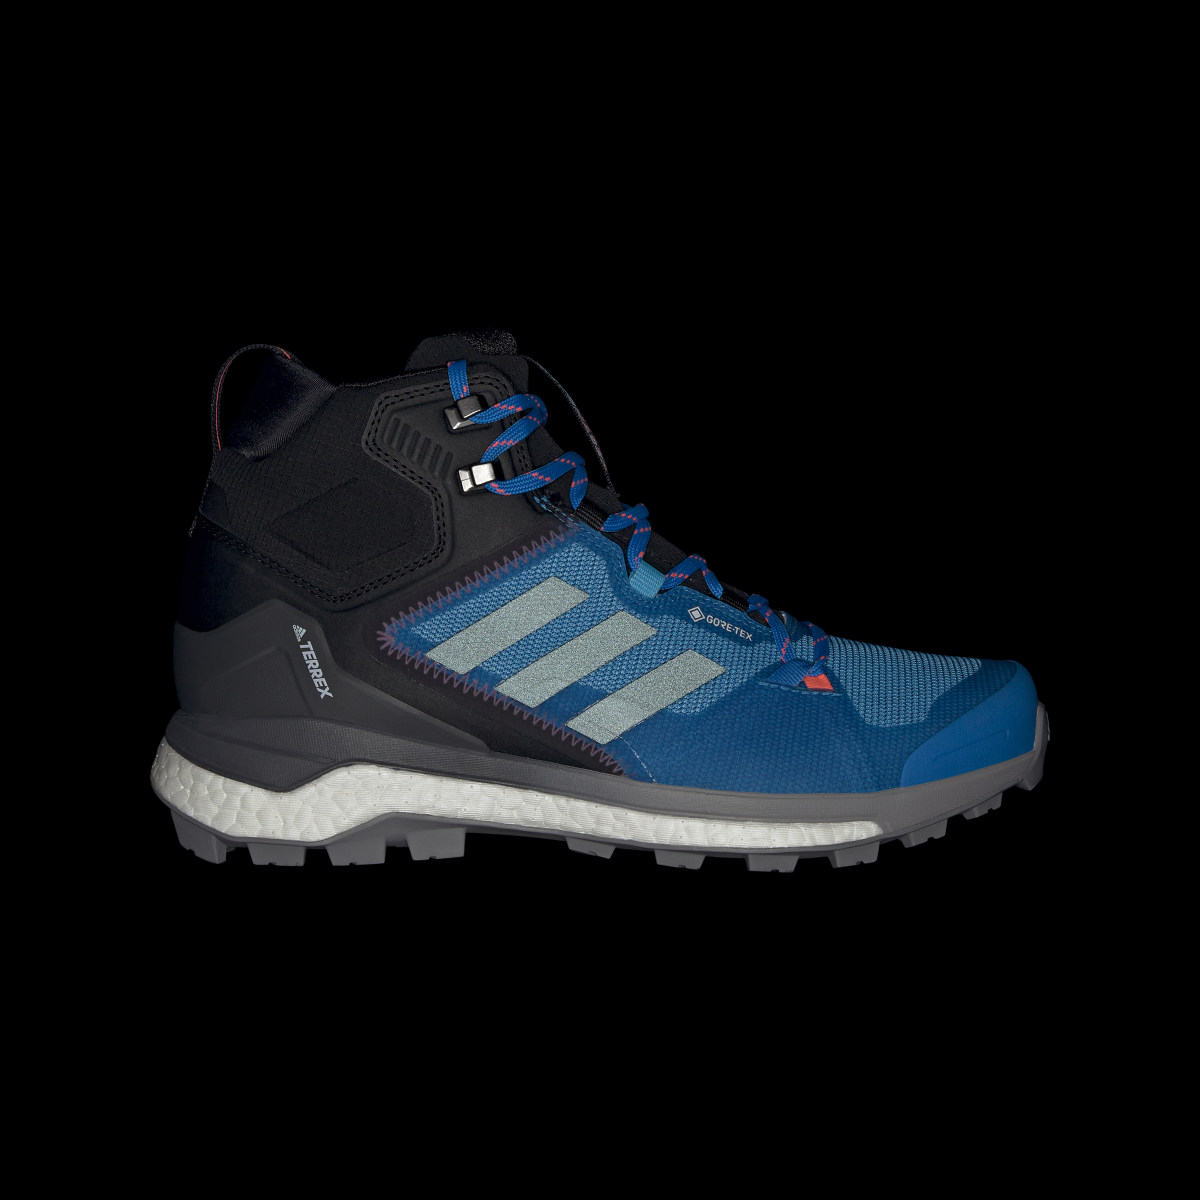 Adidas TERREX Skychaser 2 Mid GORE-TEX Hiking Shoes. 8